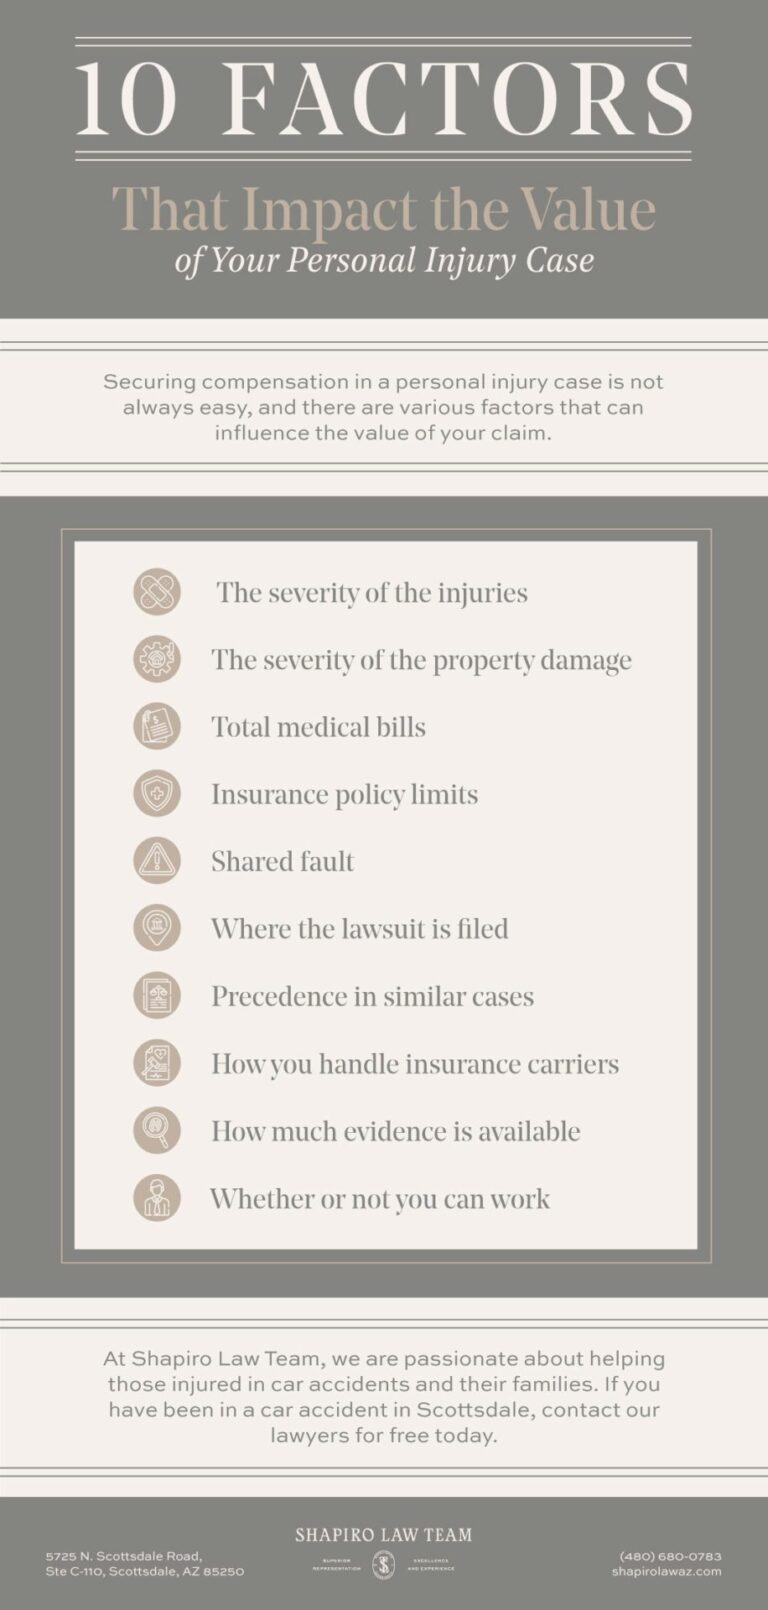 Key Factors to Consider in a Personal Injury Claim